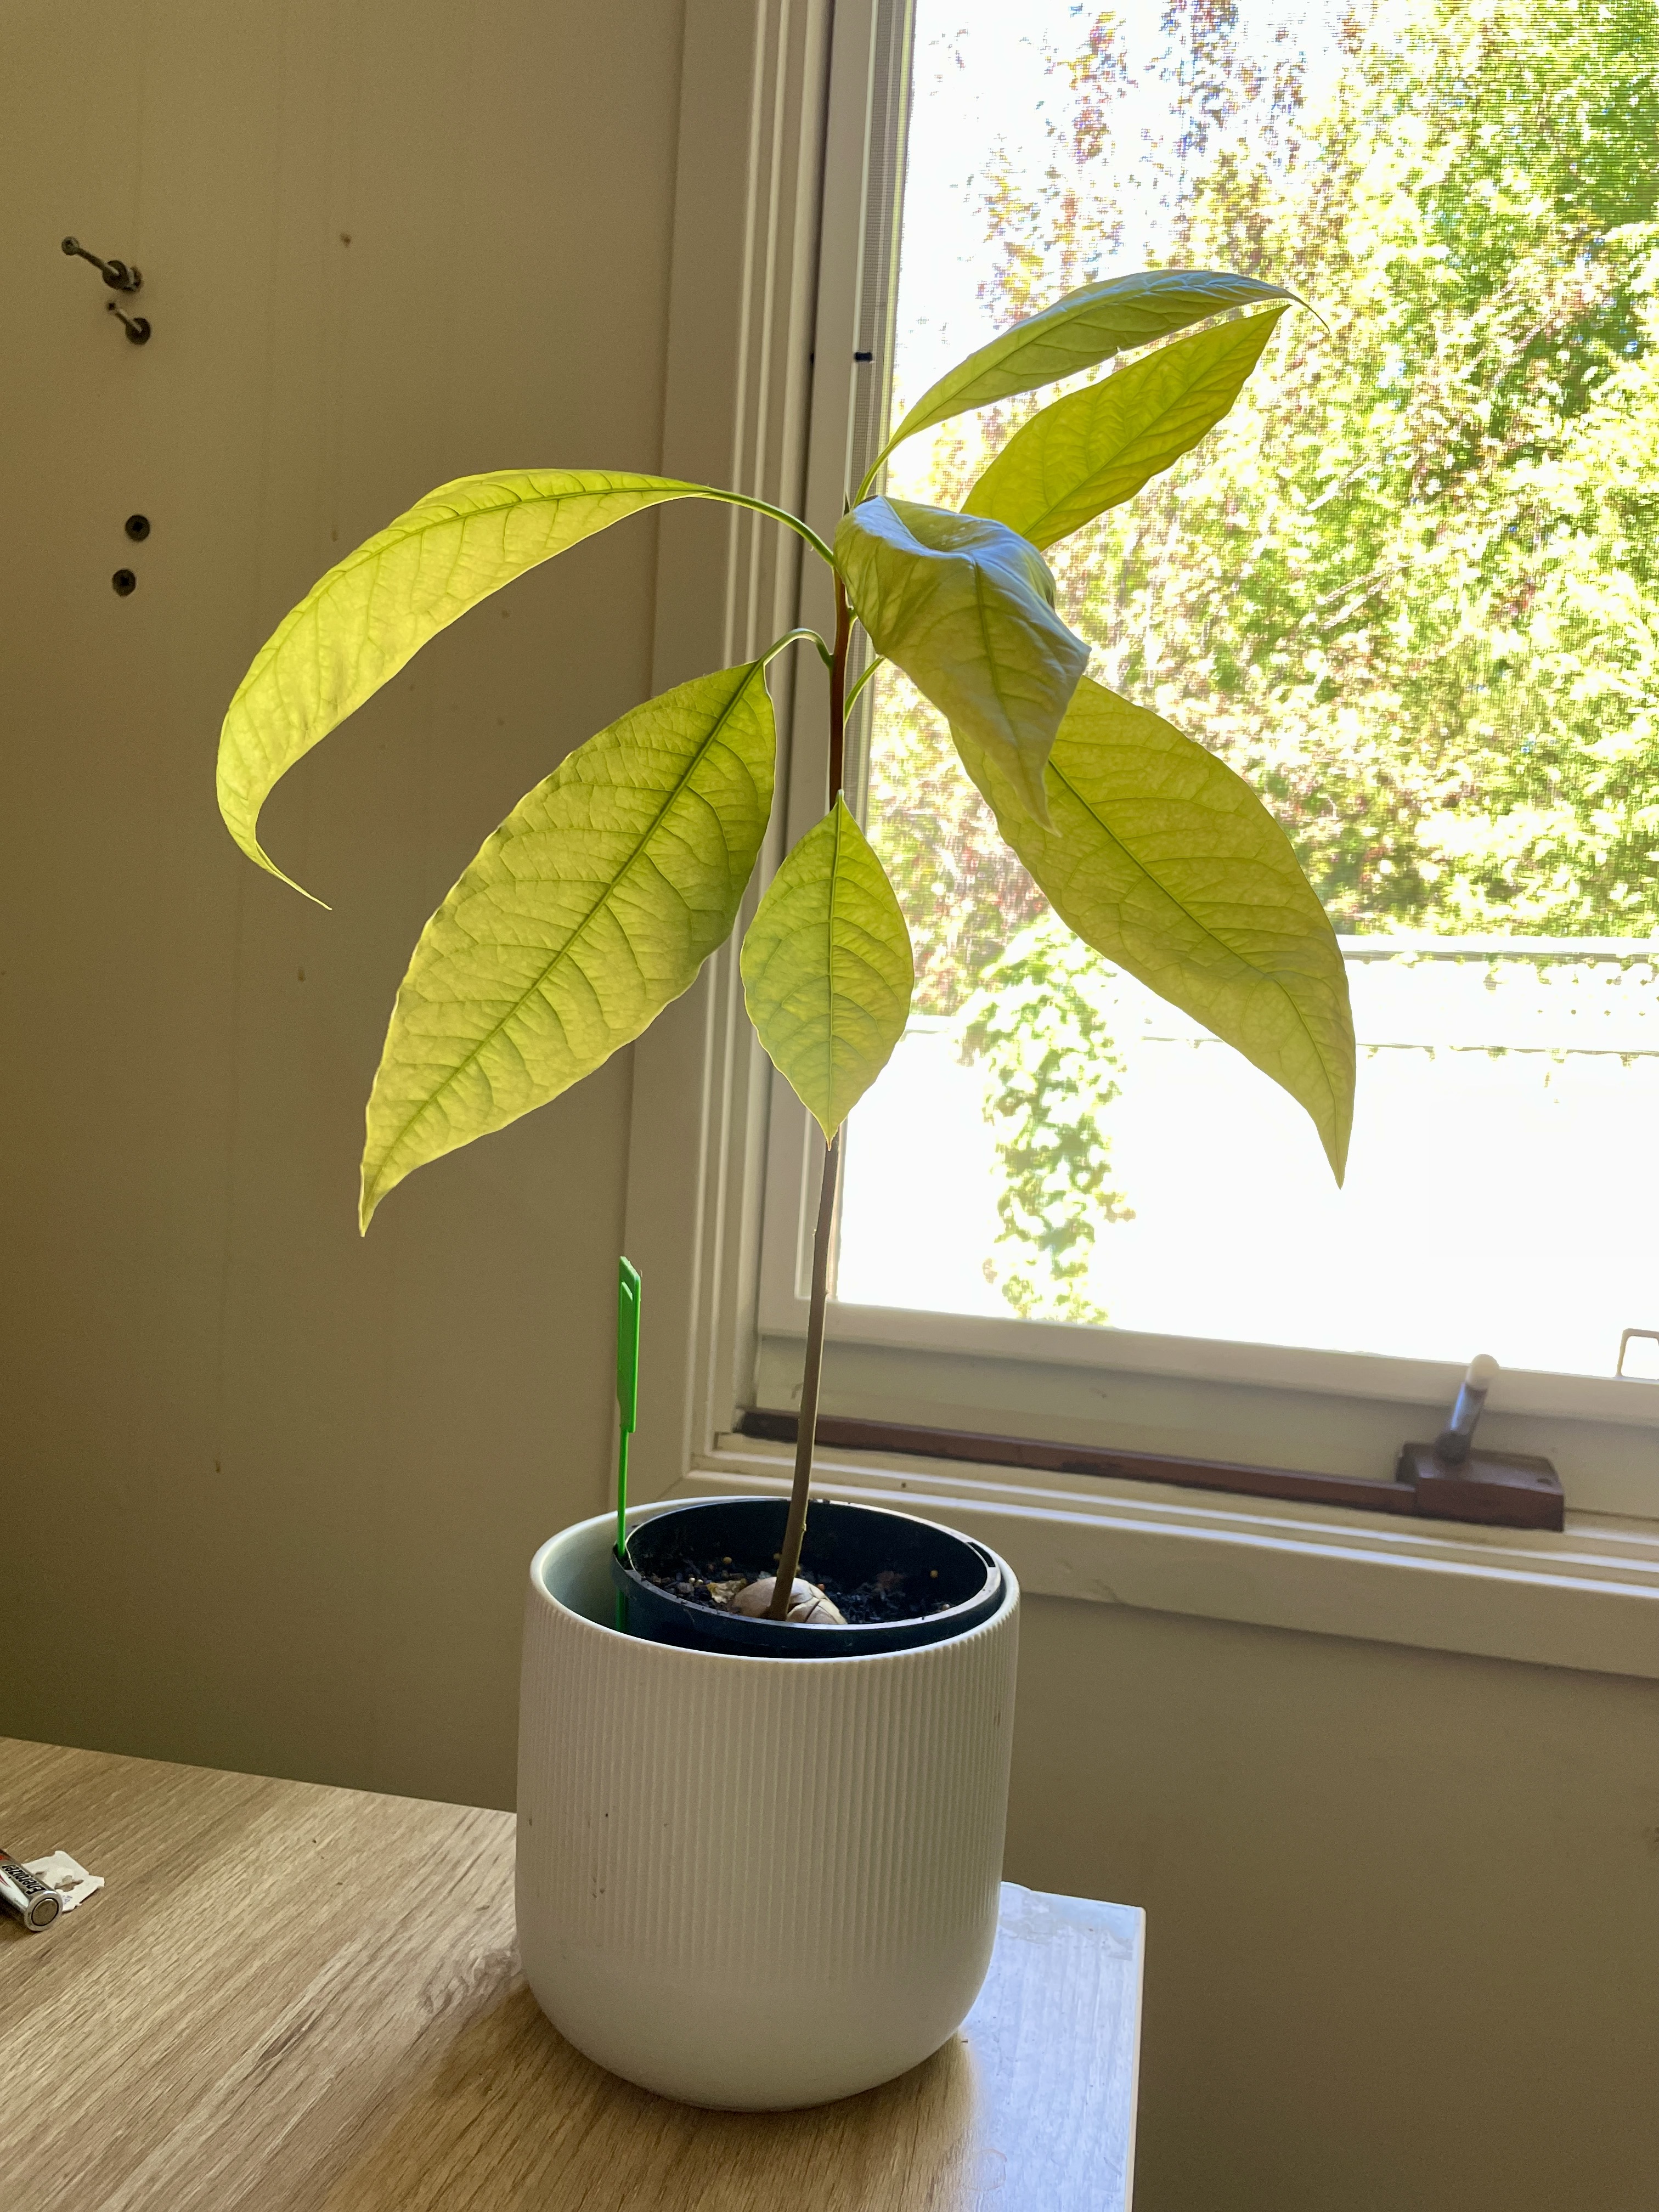 A small avocado plant with 7 leaves. 6 of which are about 15cm long each